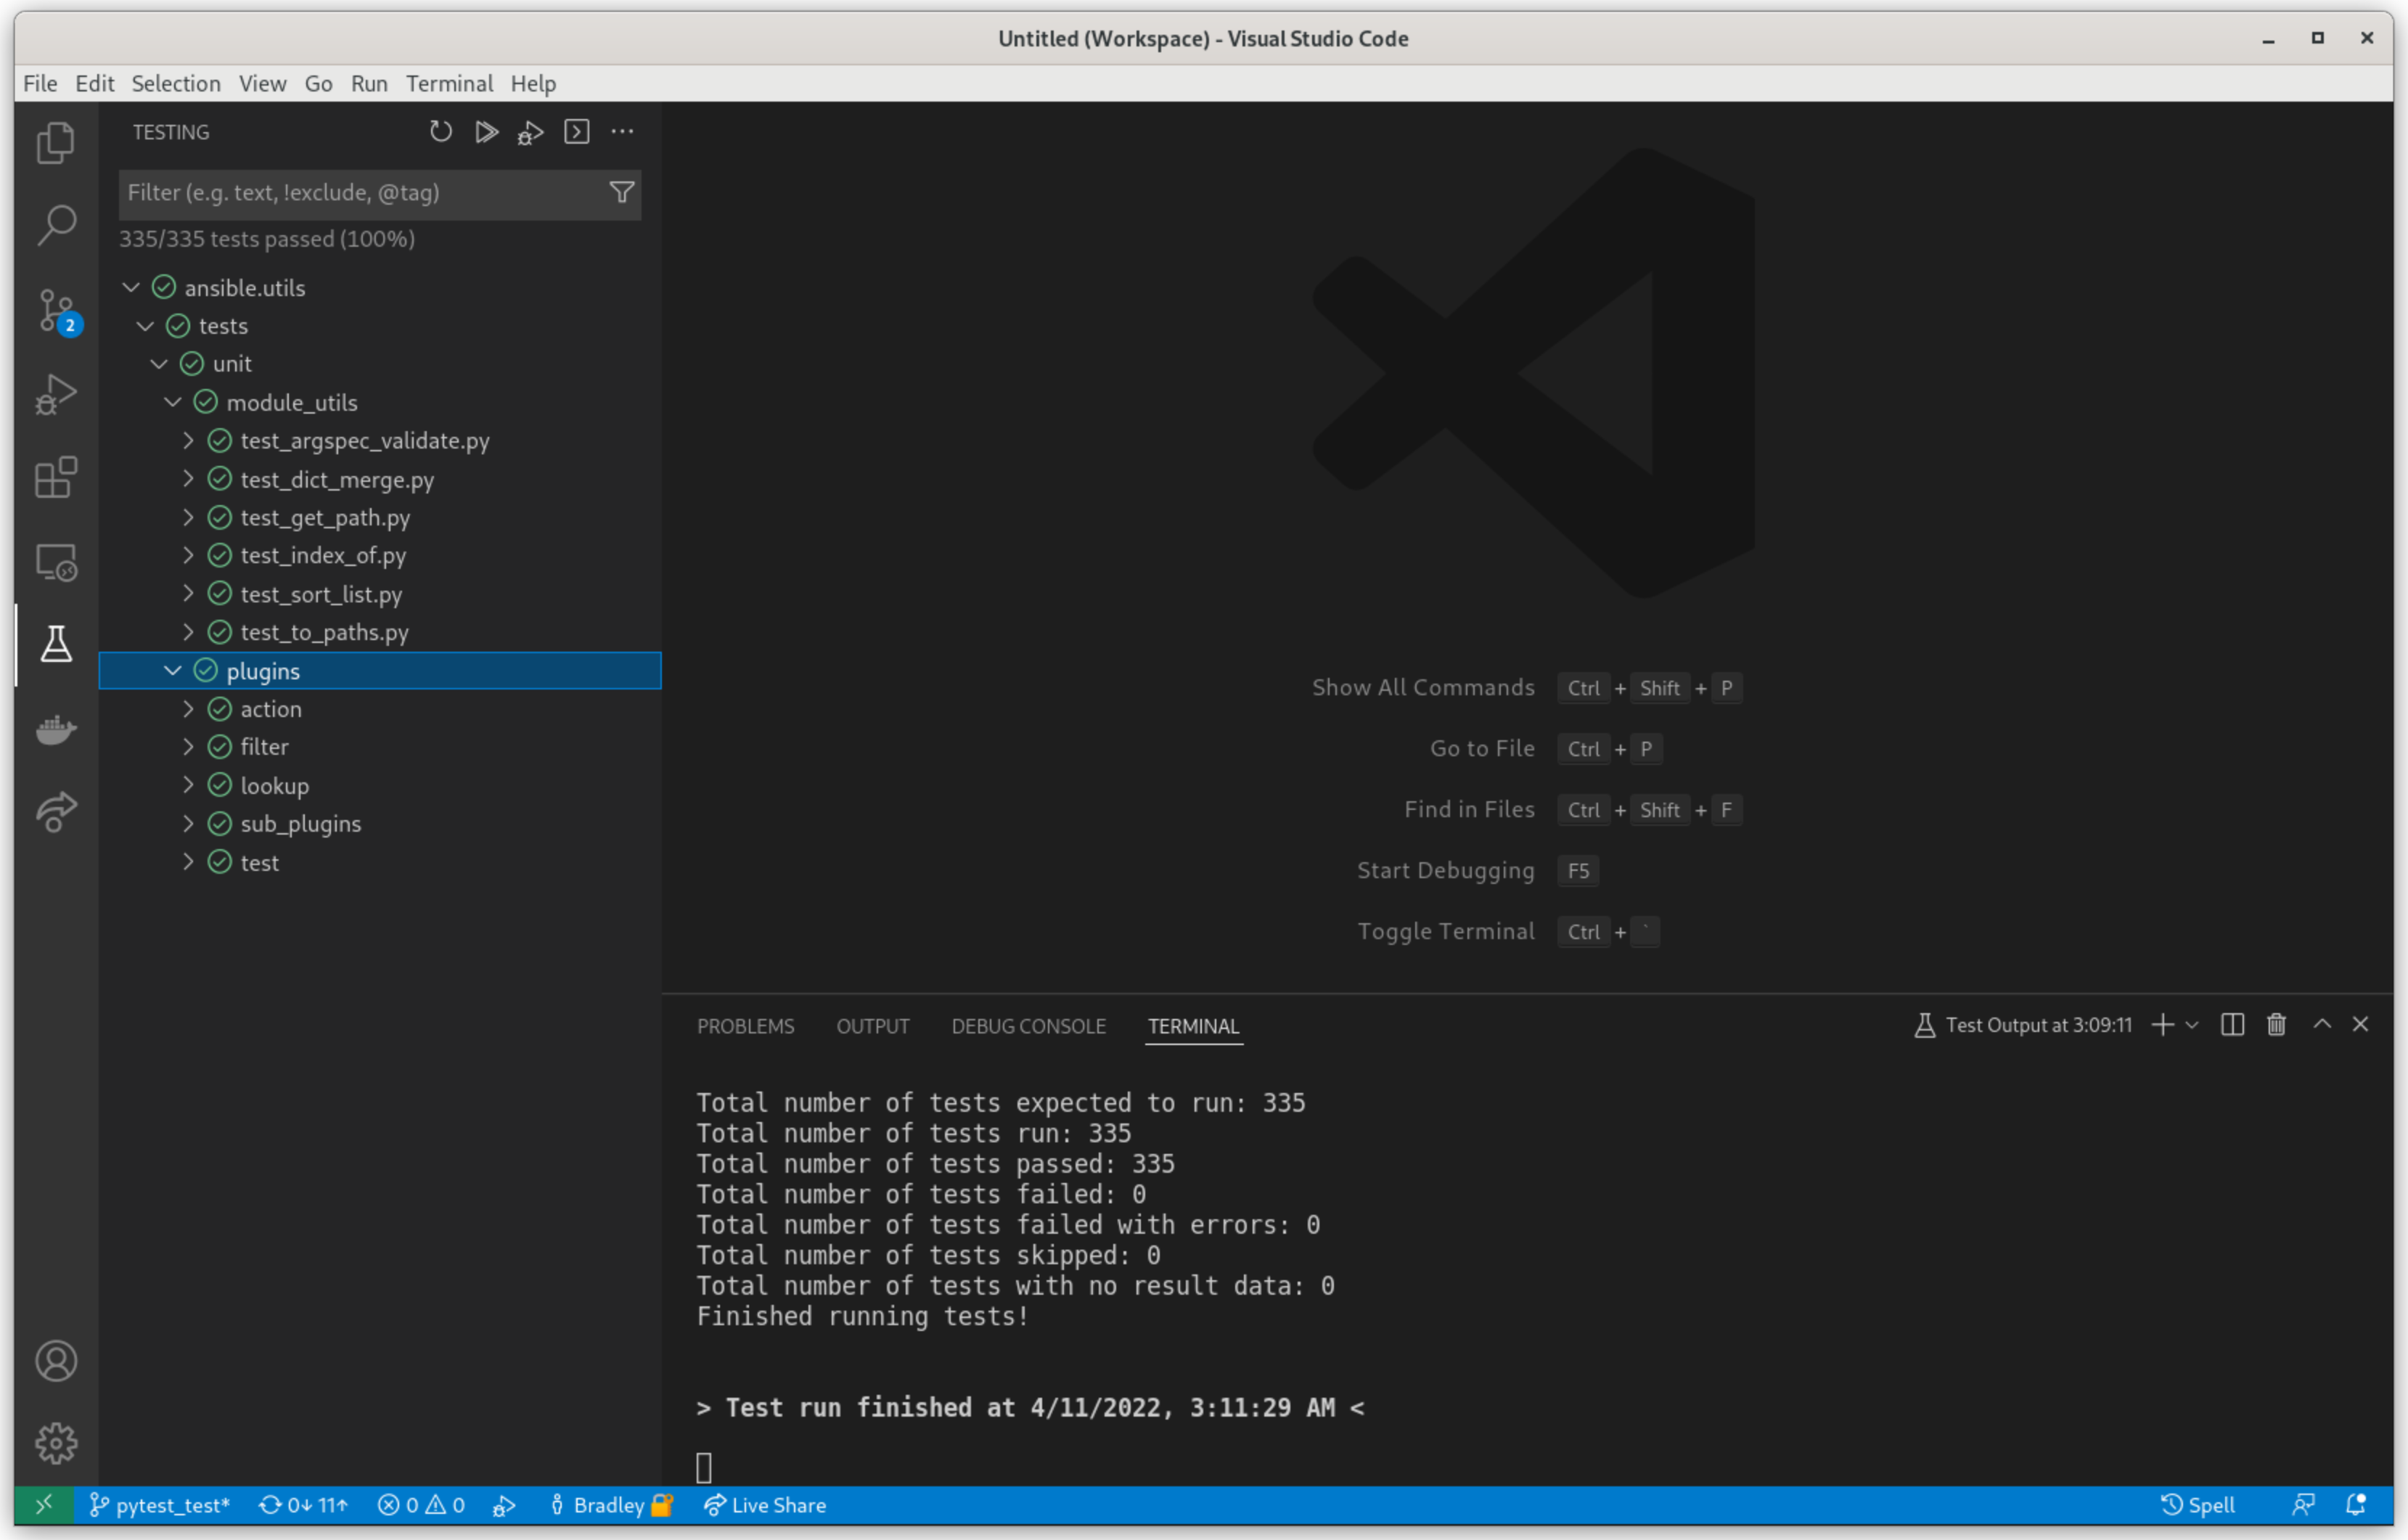 VScode Overview